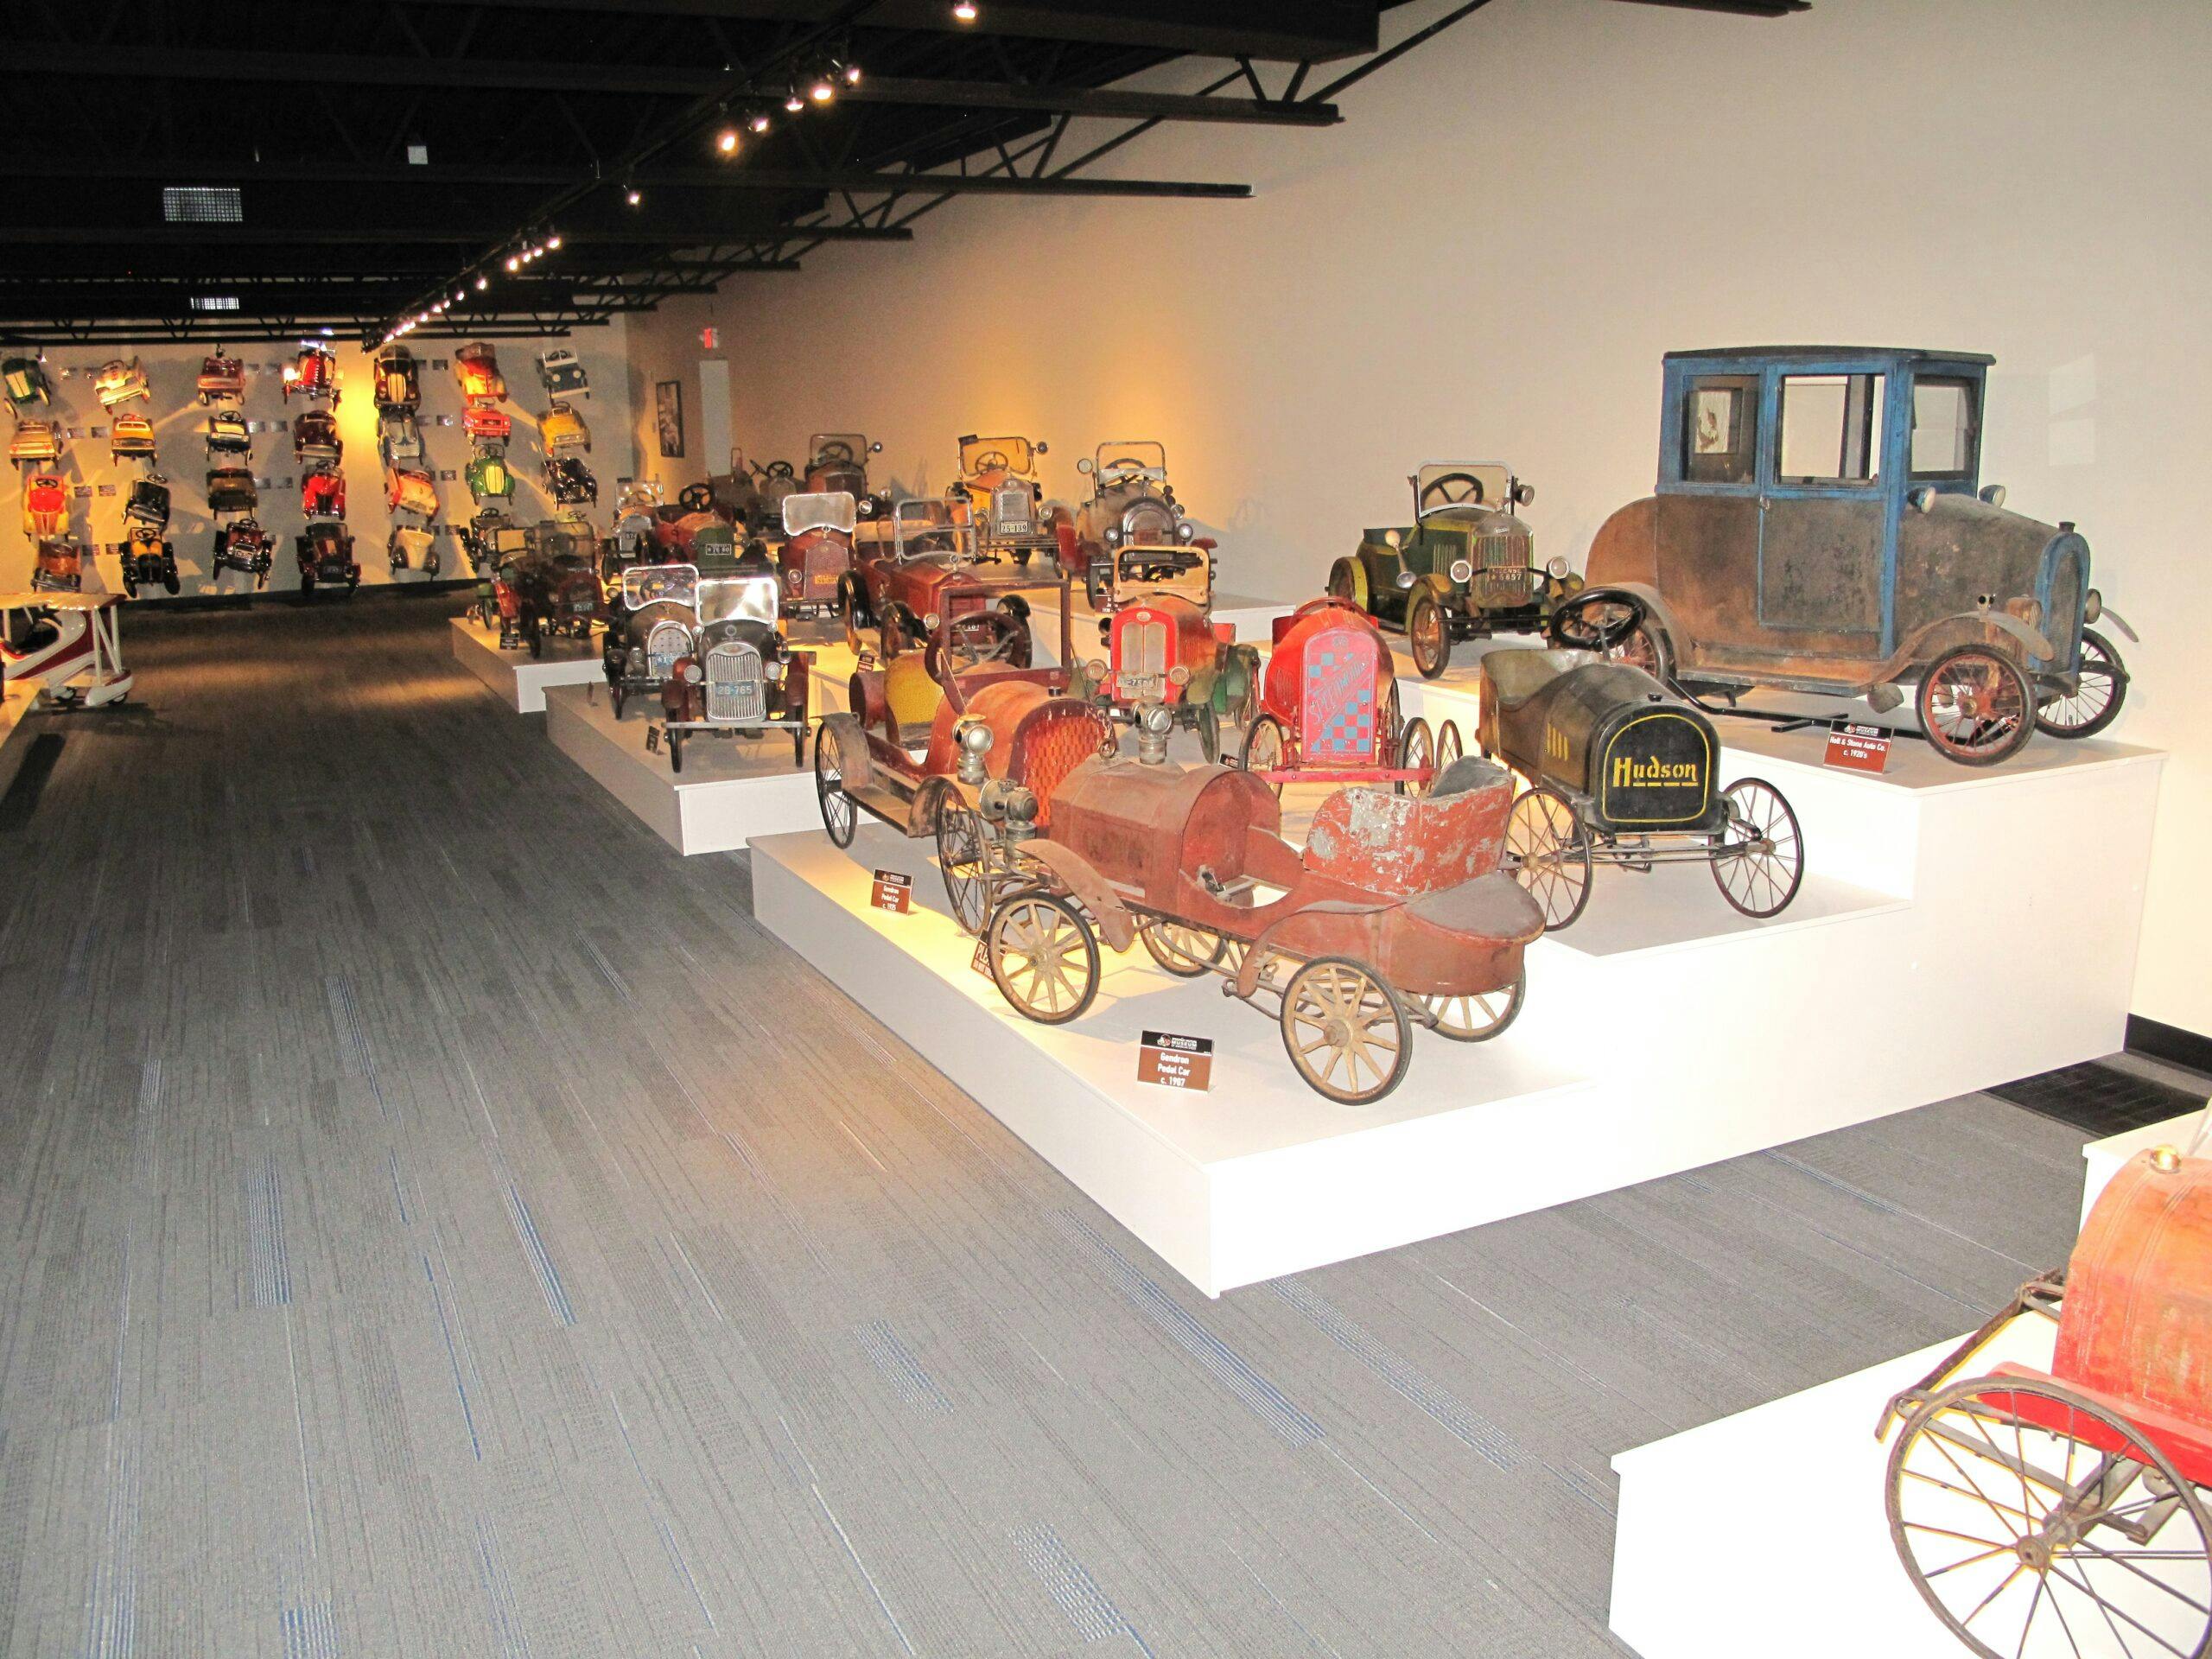 Museum of American Speed soapbox cars